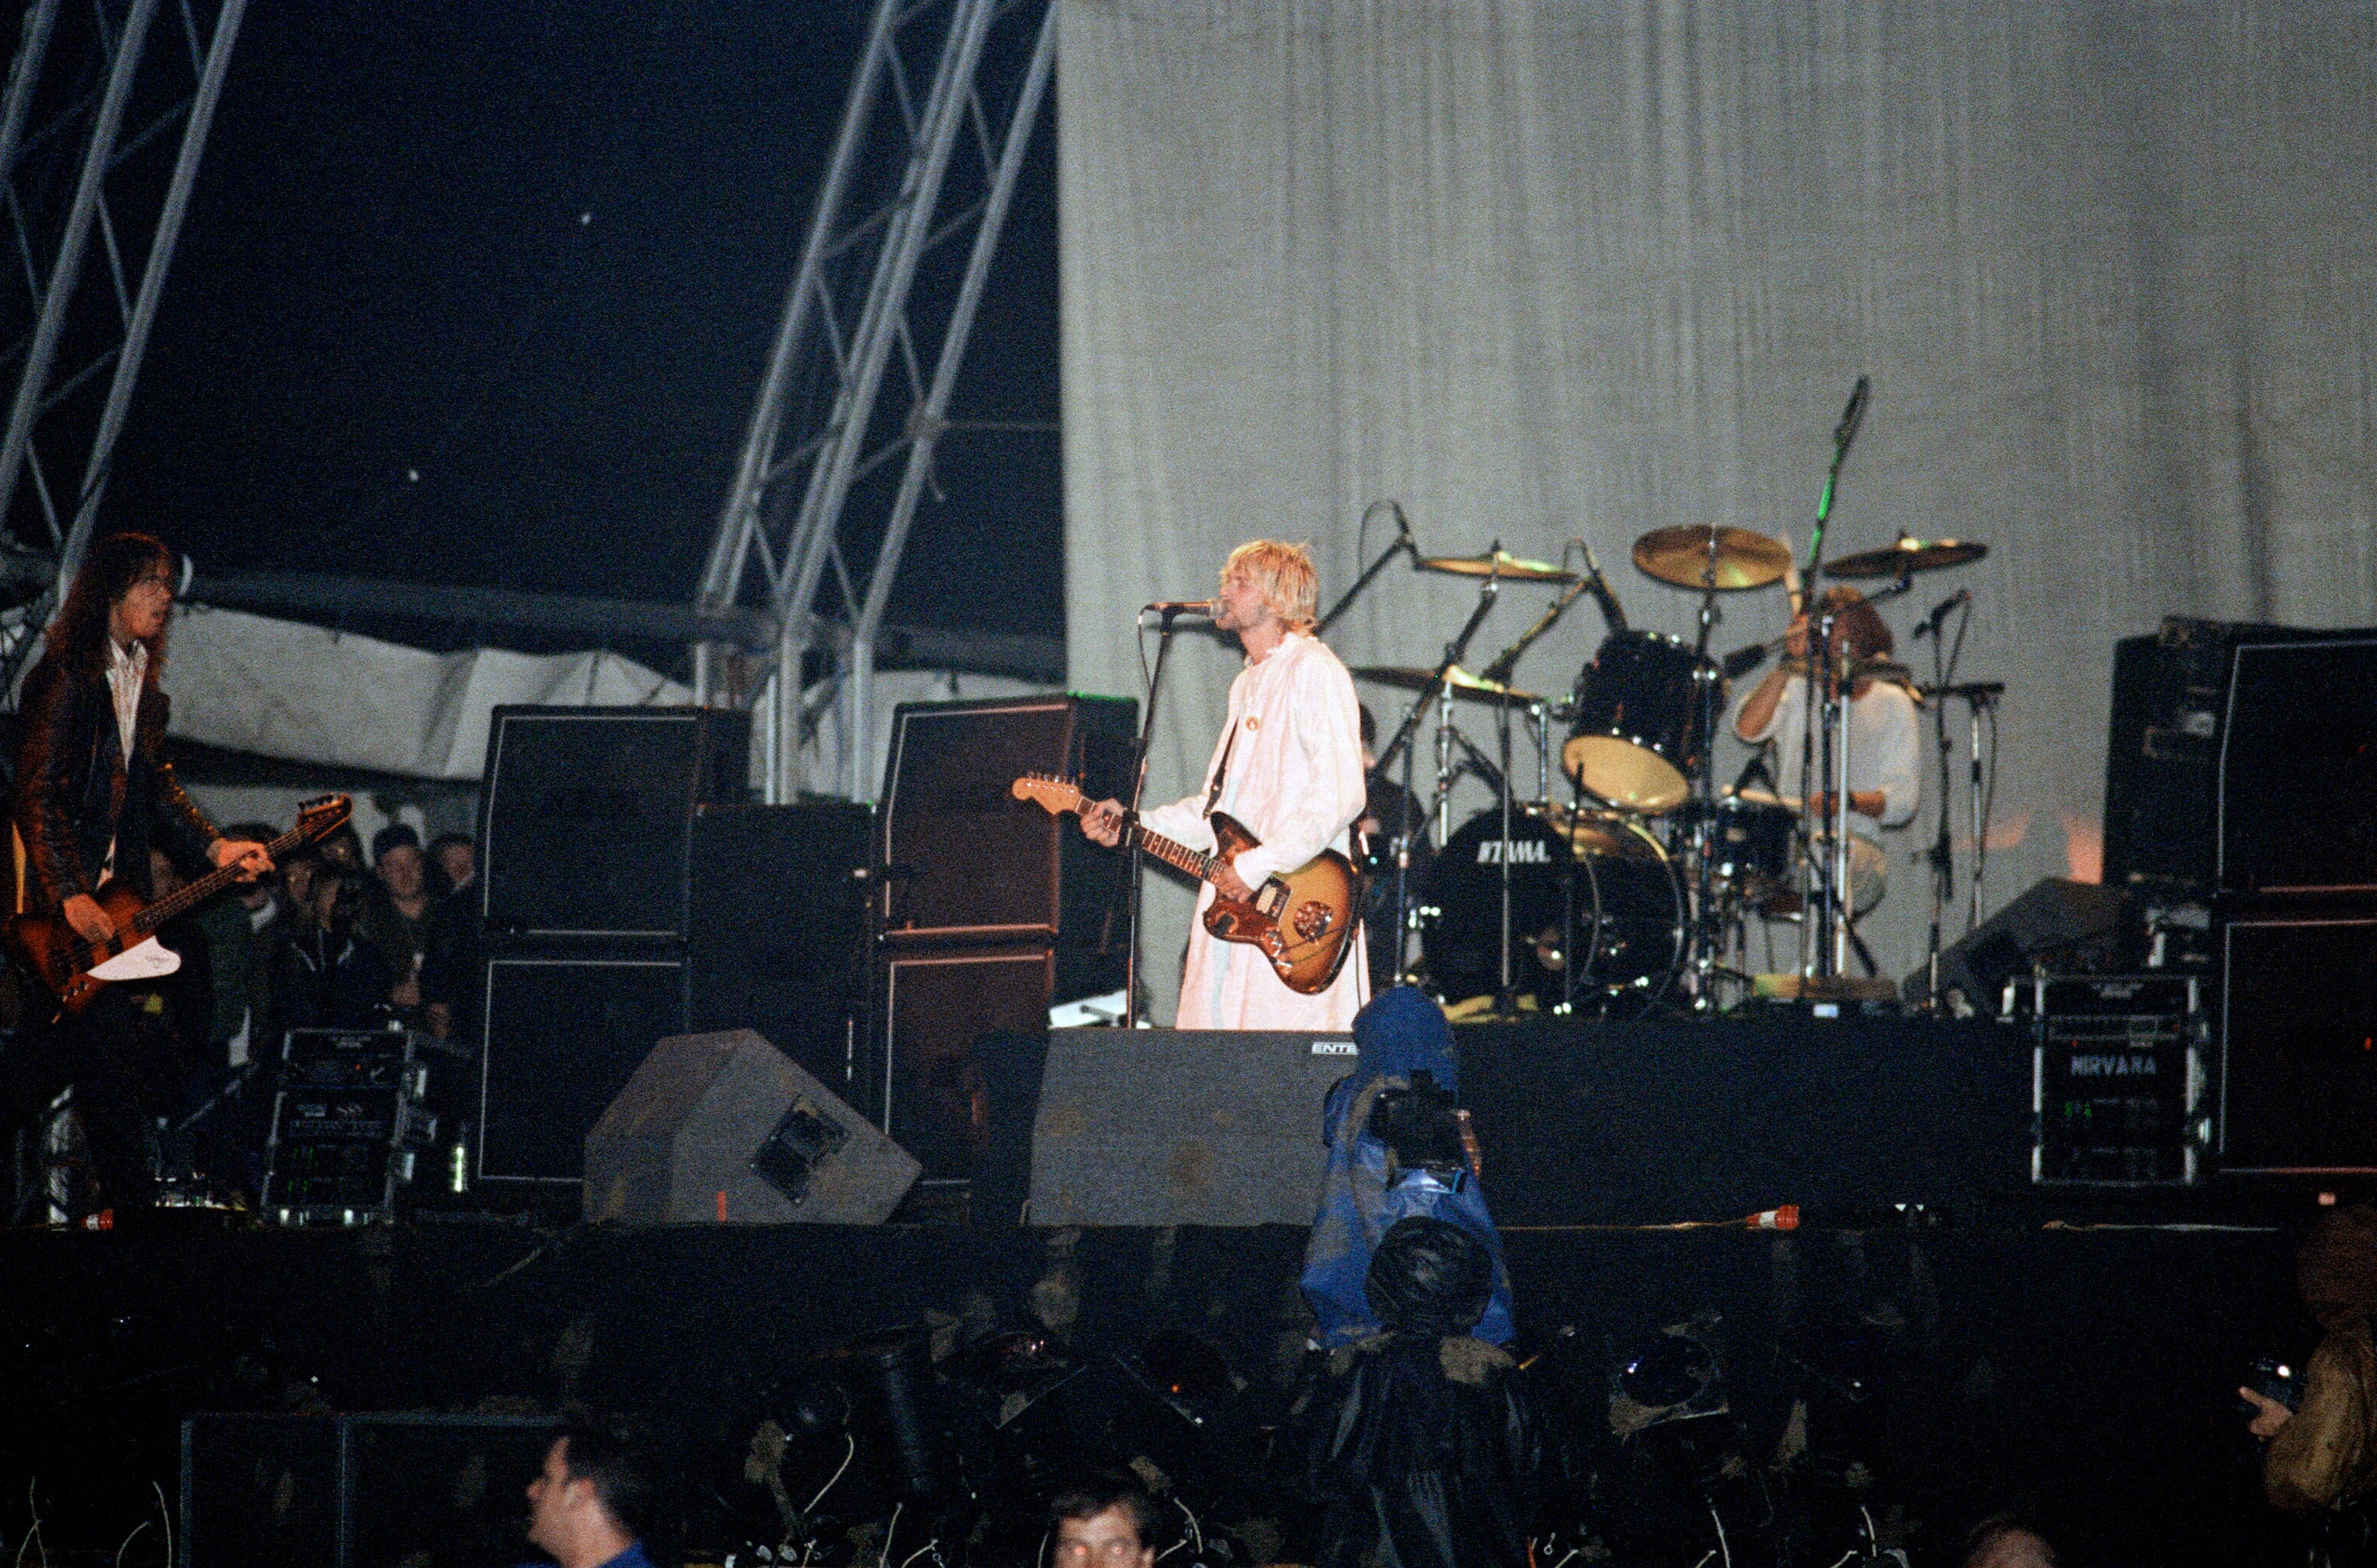 Kurt Cobain of Nirvana performing in a hospital gown at Reading 1992